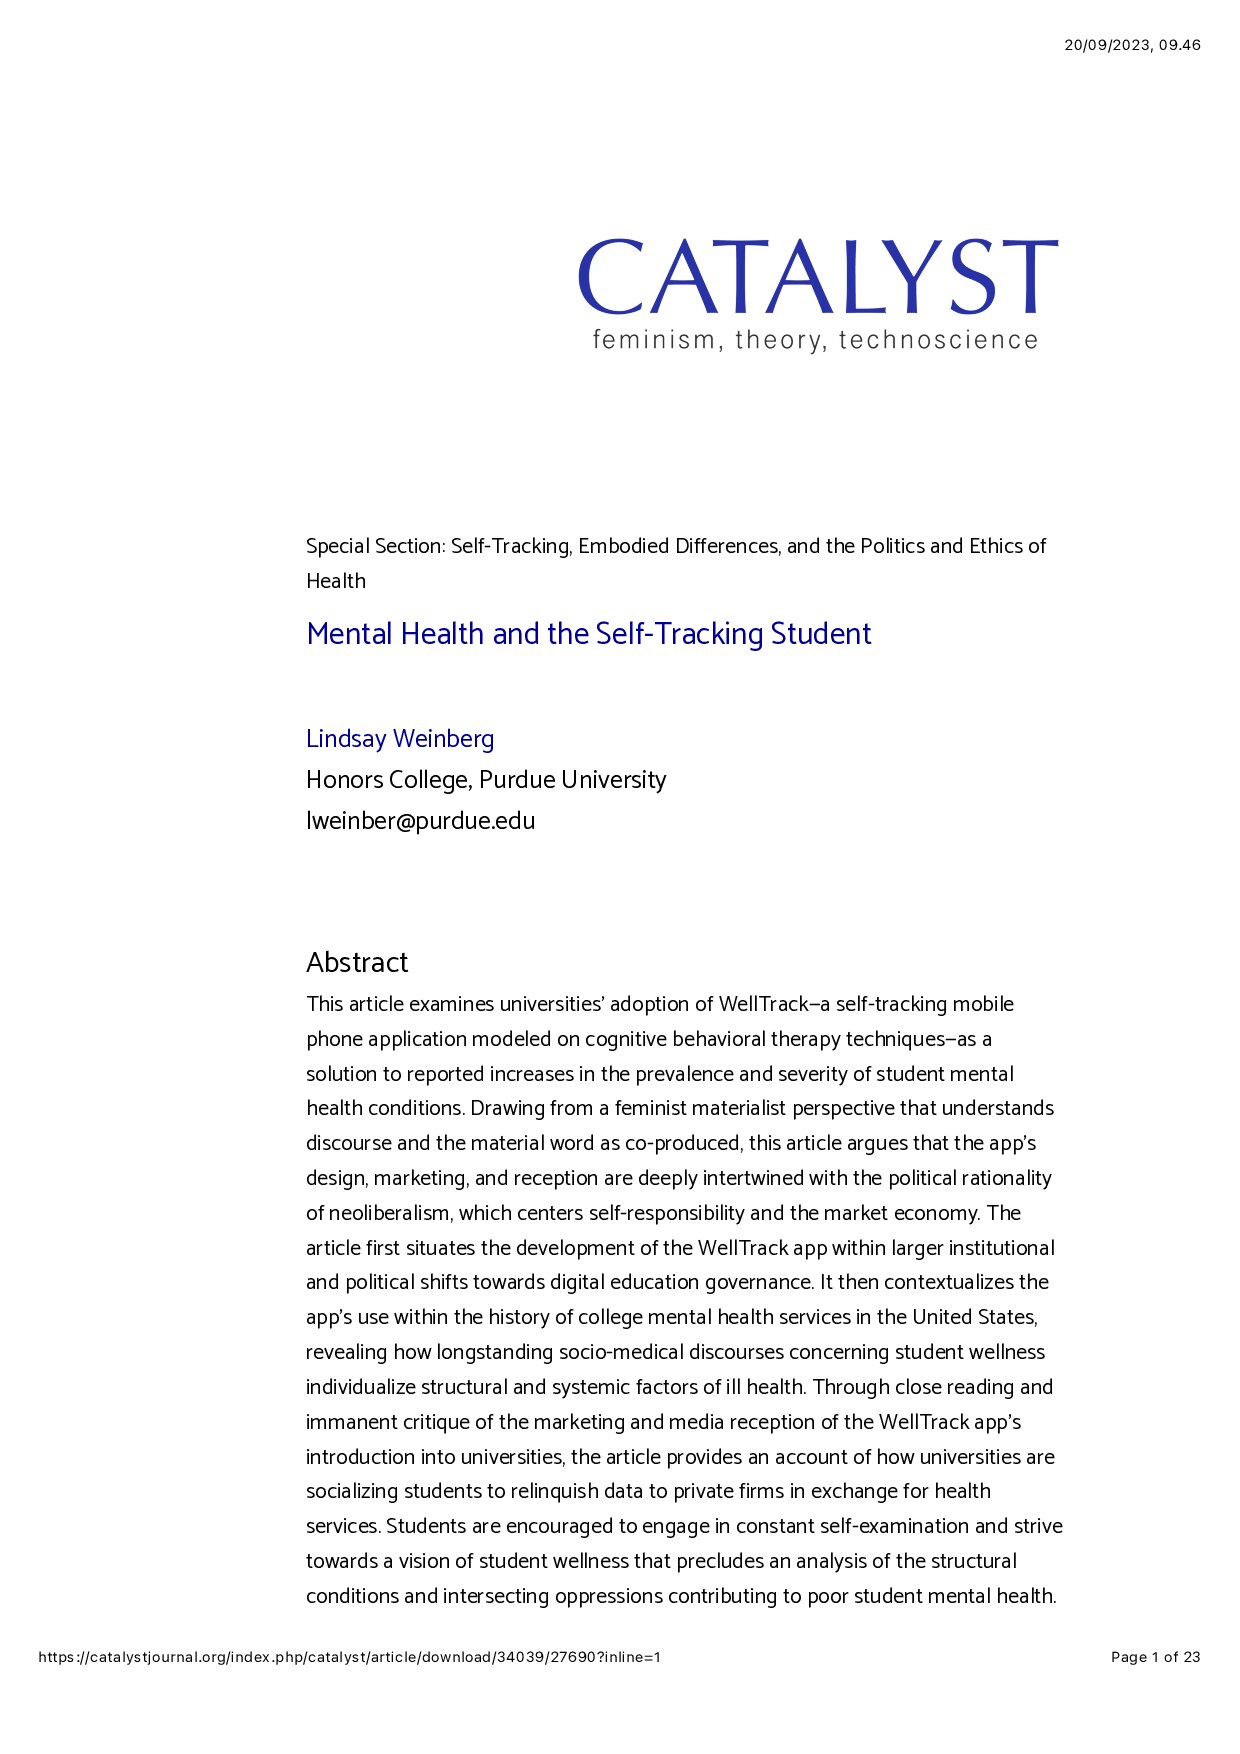 Mental Health and the Self-Tracking Student